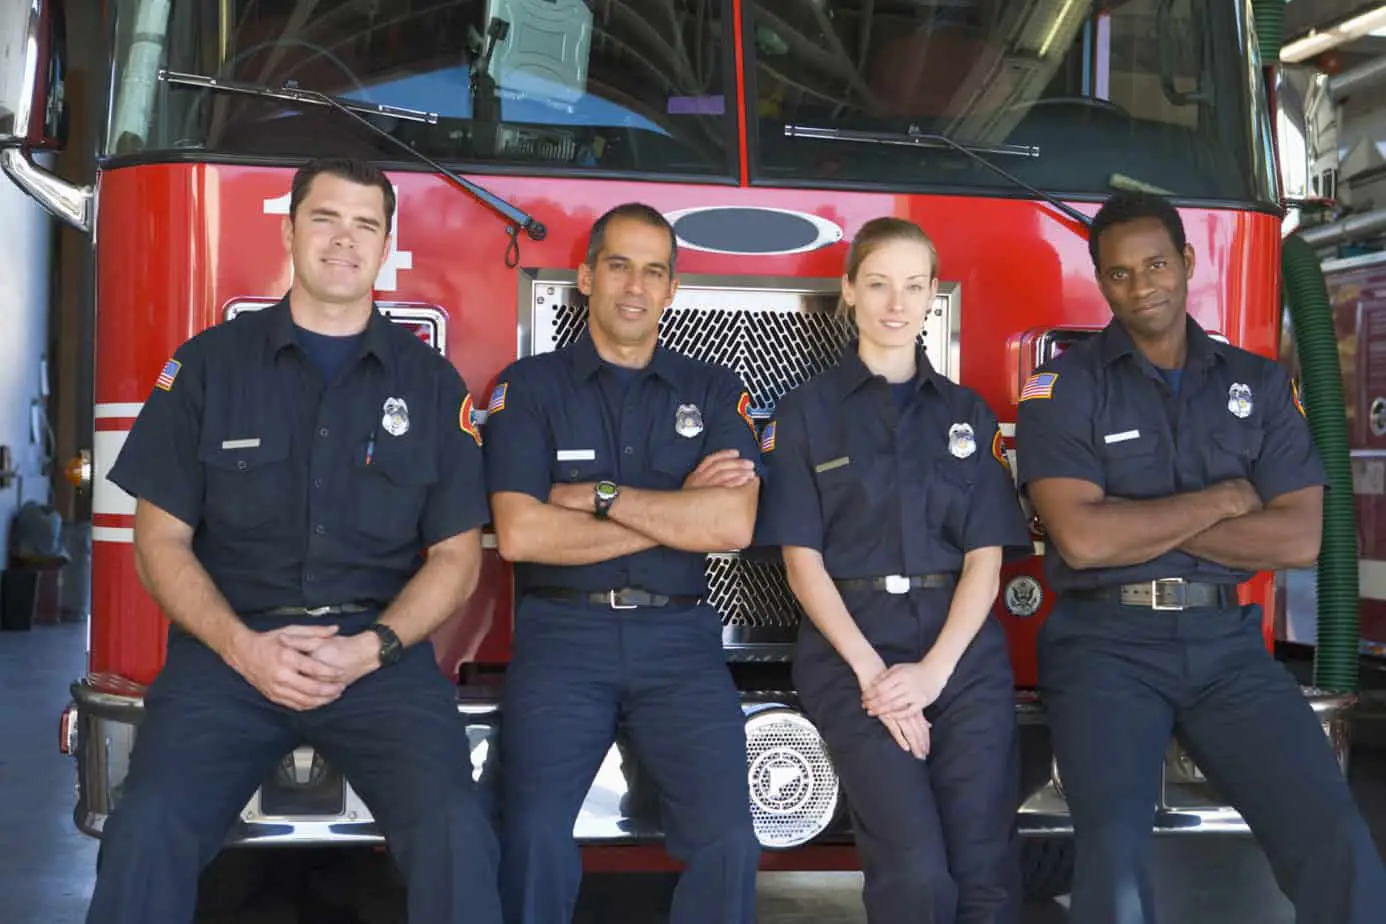 Portrait Of Firefighters Standing By A Fire Engine RtHqg0RBi SBI 301057561 1536x1024 